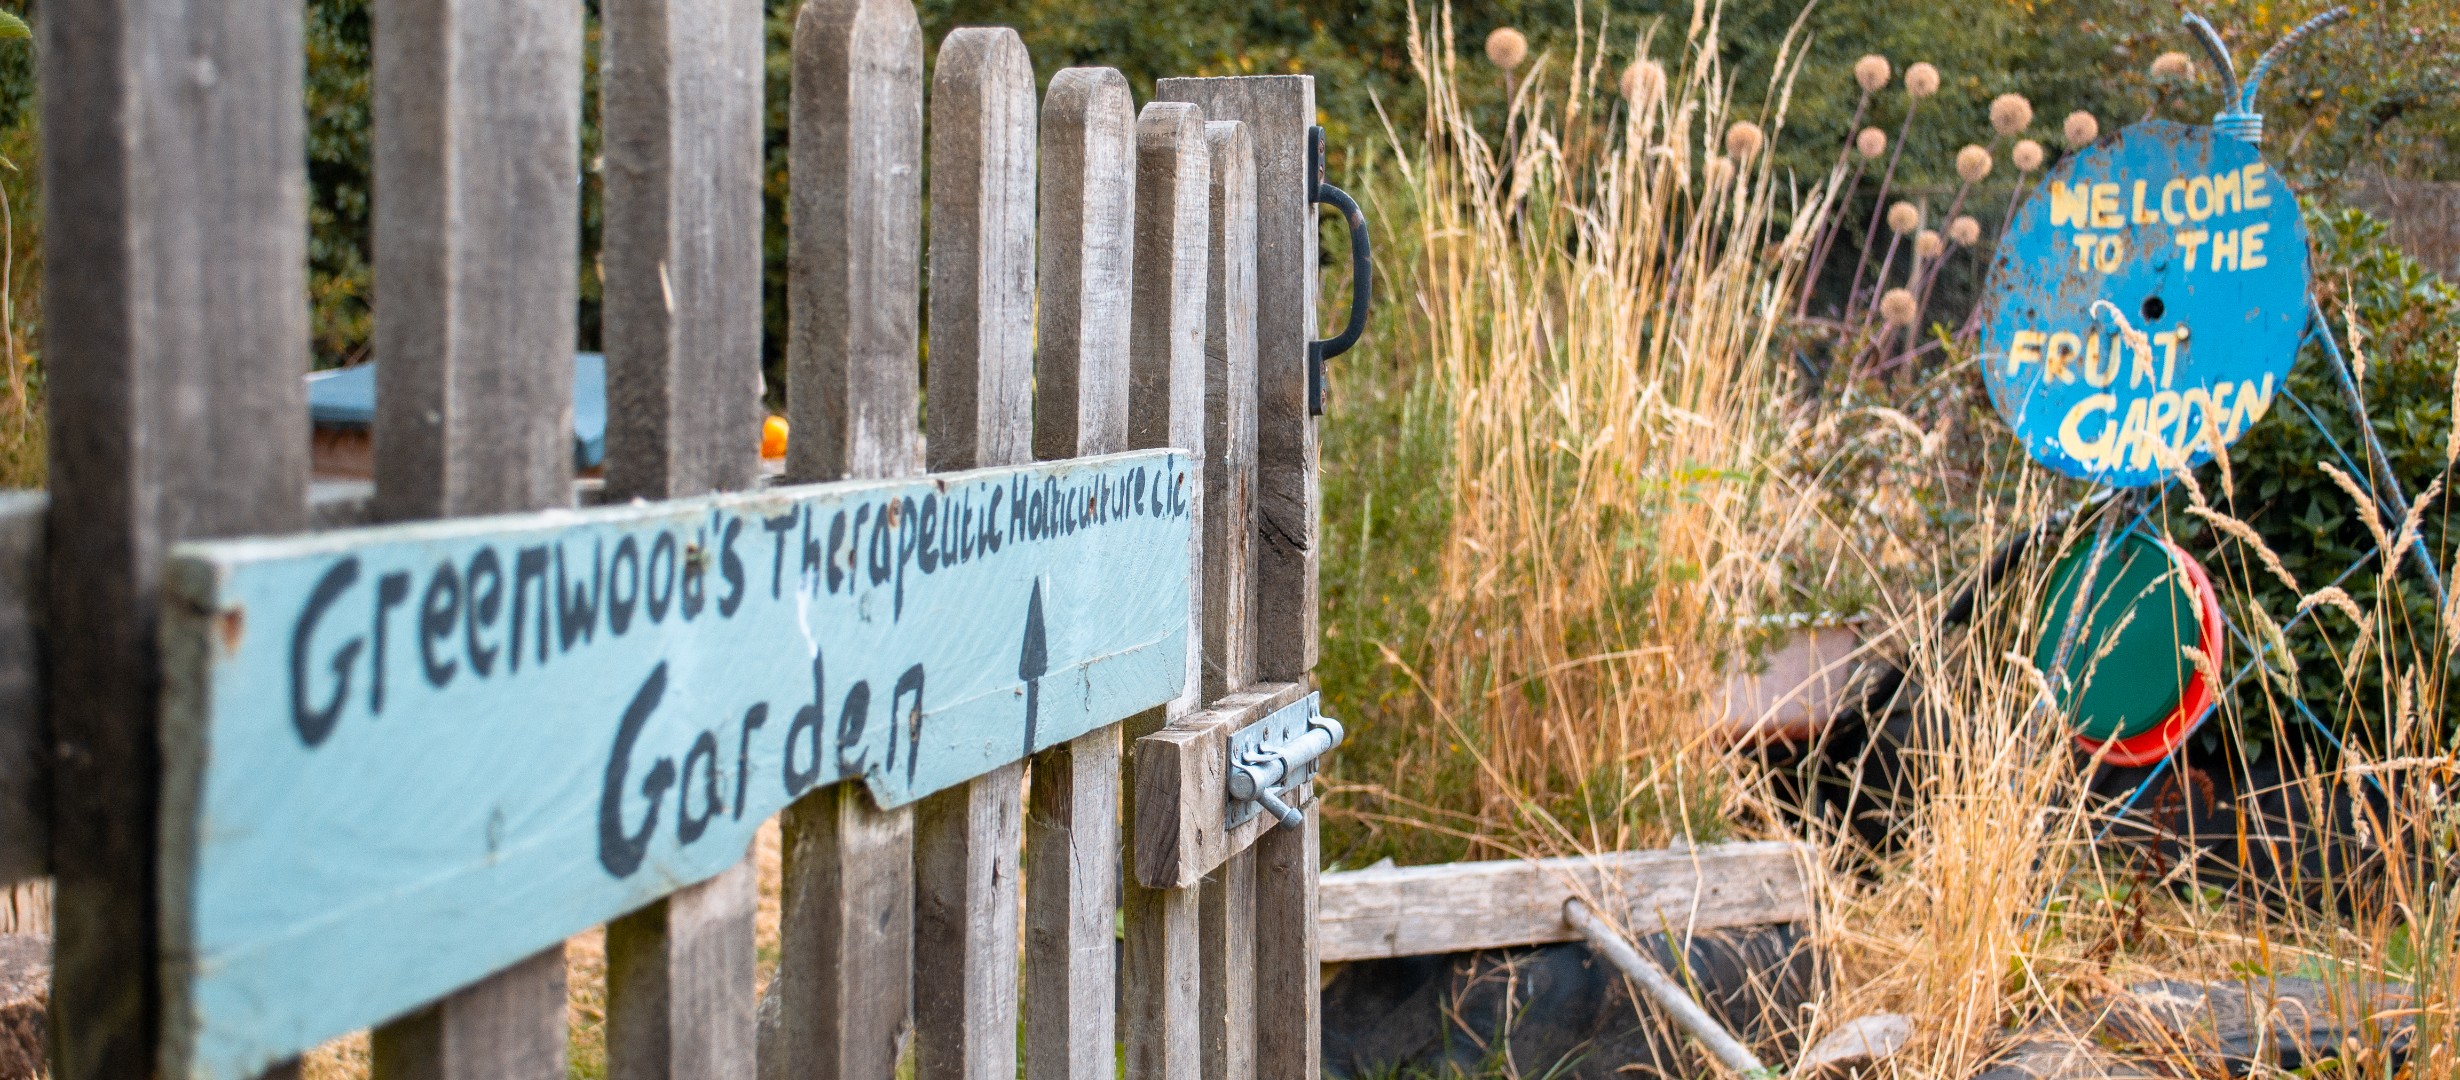 photo shows a wooden gate with a rustic hand lettered sign reading Greenwoods Therapeutic Horticulture CIC Garden. In the background are dried long grasses and a round hand painted sign reading Welcome To The Fruit Garden.